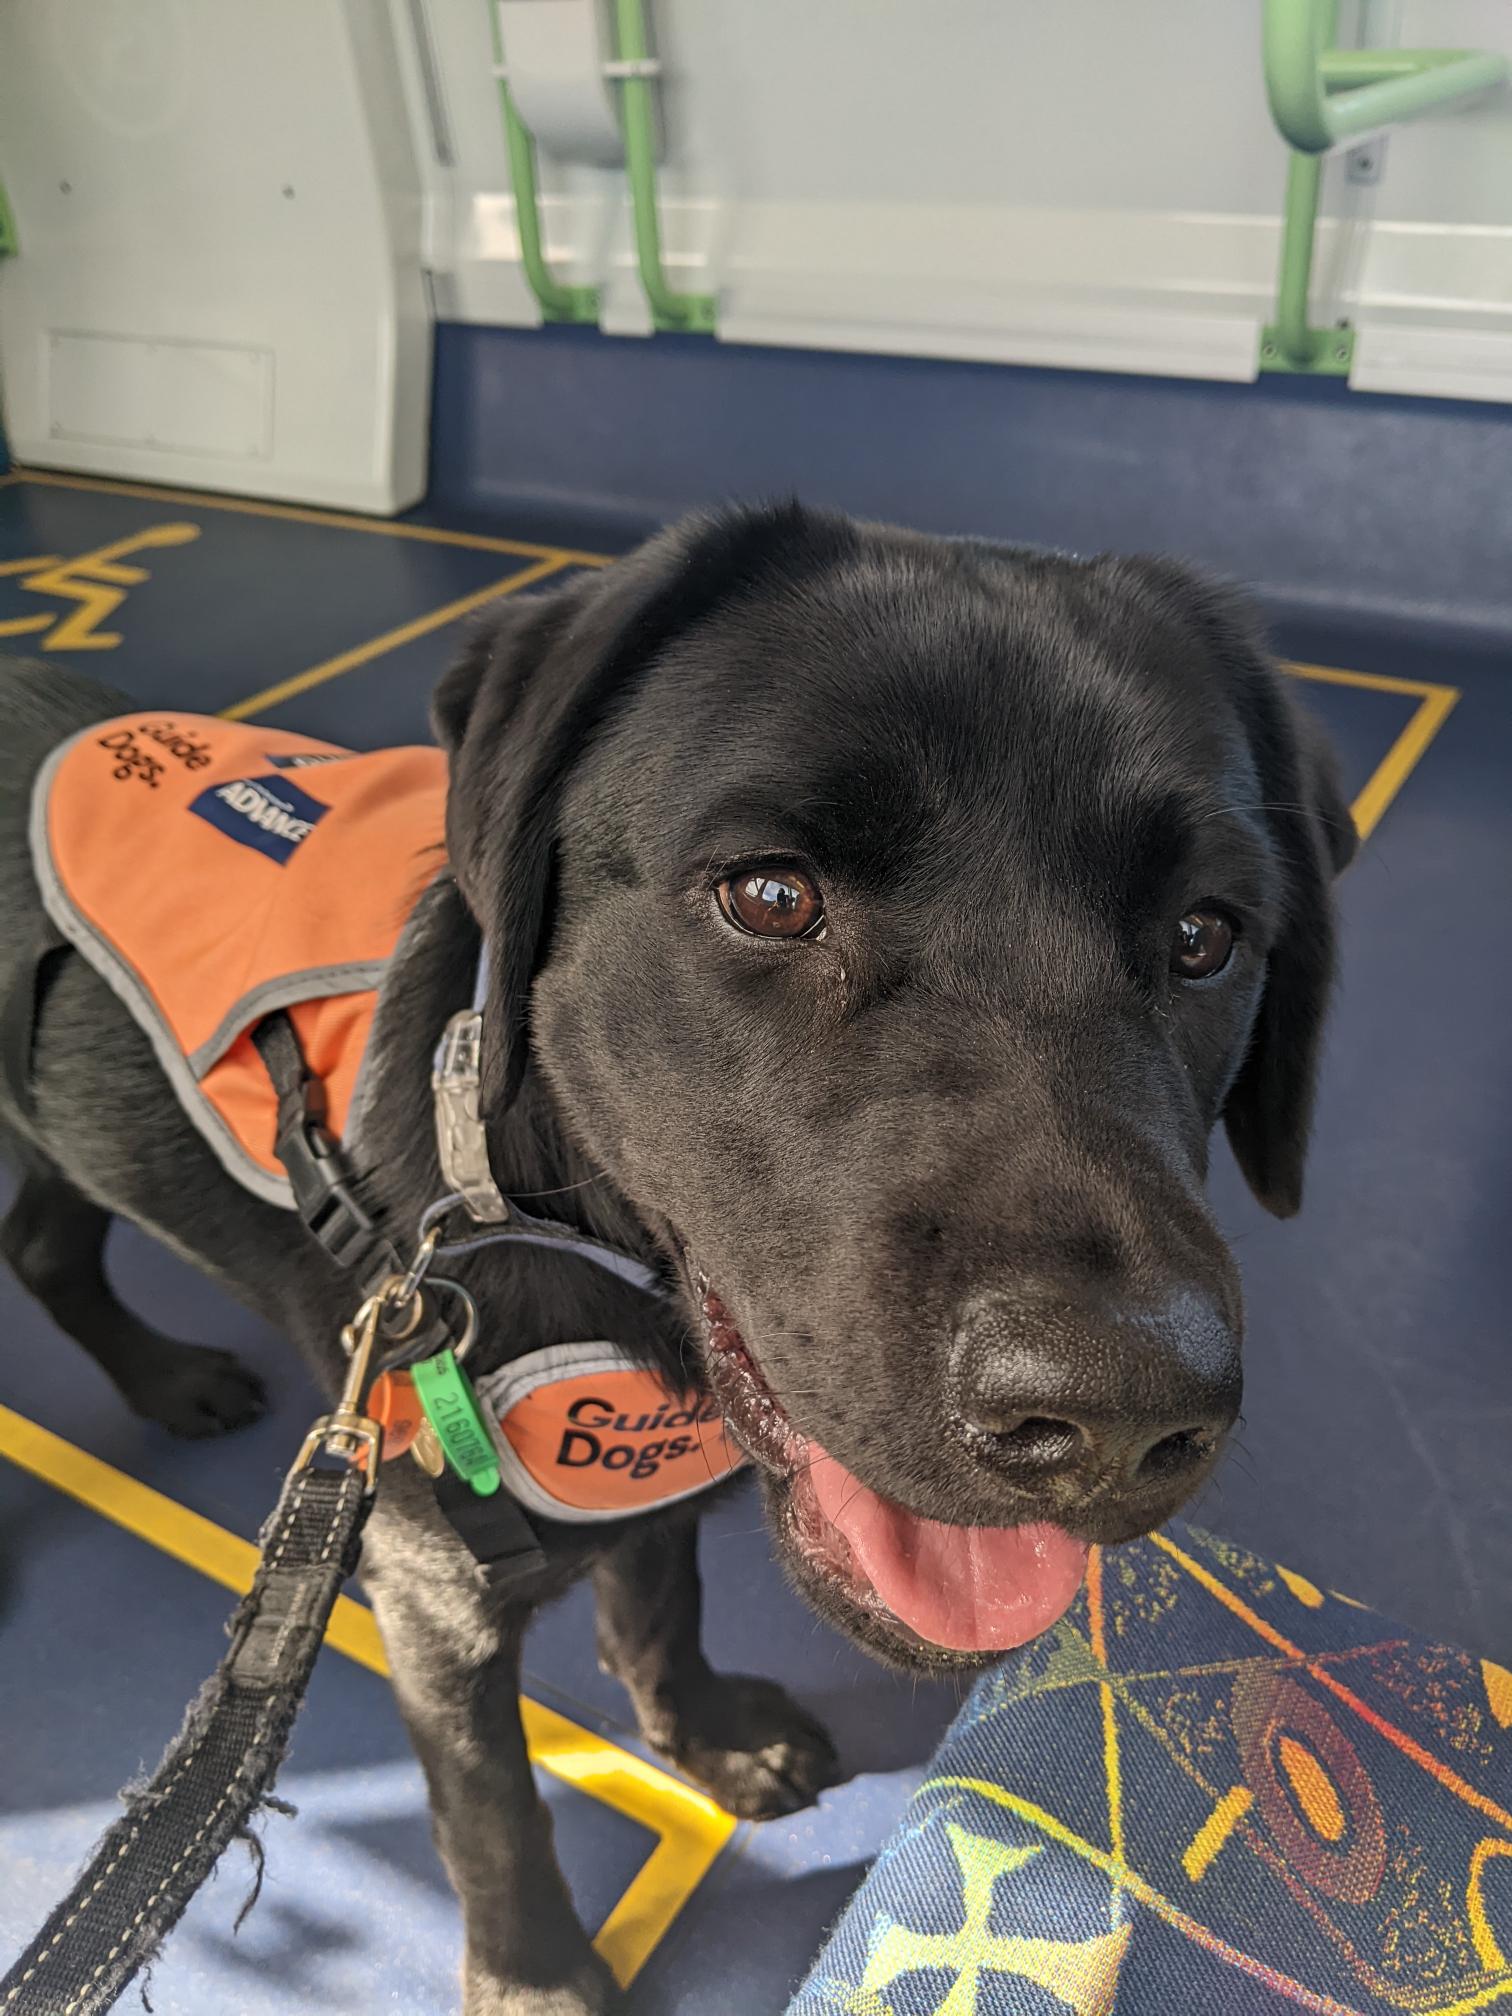 A black labrador standing inside a train. It is wearing an orange halter, a collar and lead.